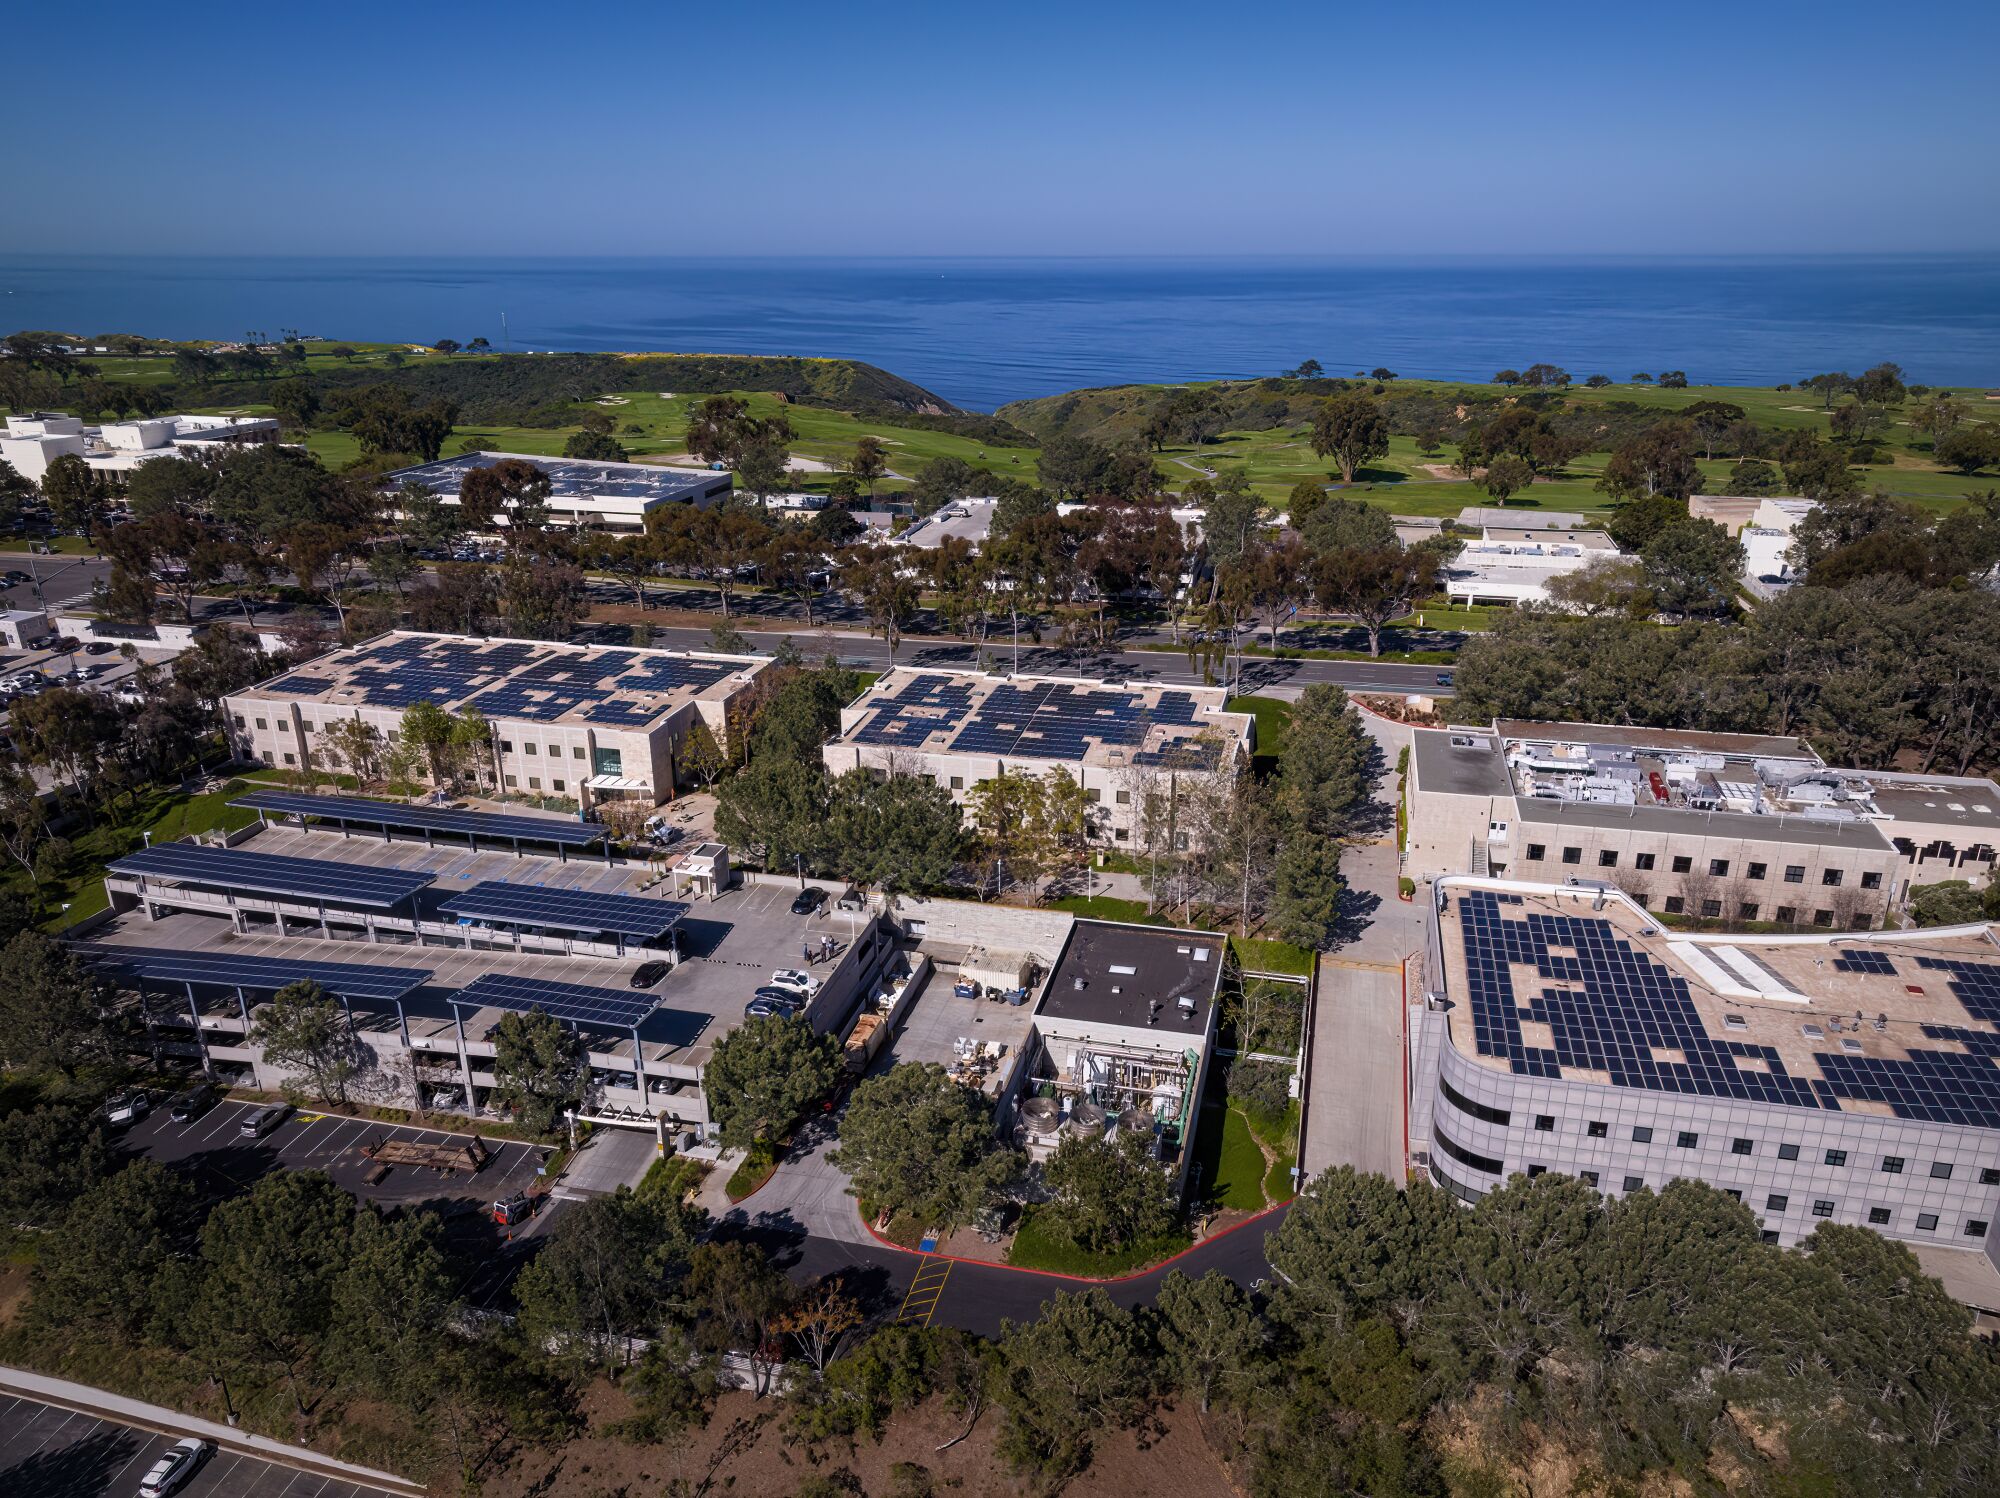 Sanford Burnham Prebys campus in La Jolla has covered its rooftops along and a parking structure in solar panels.